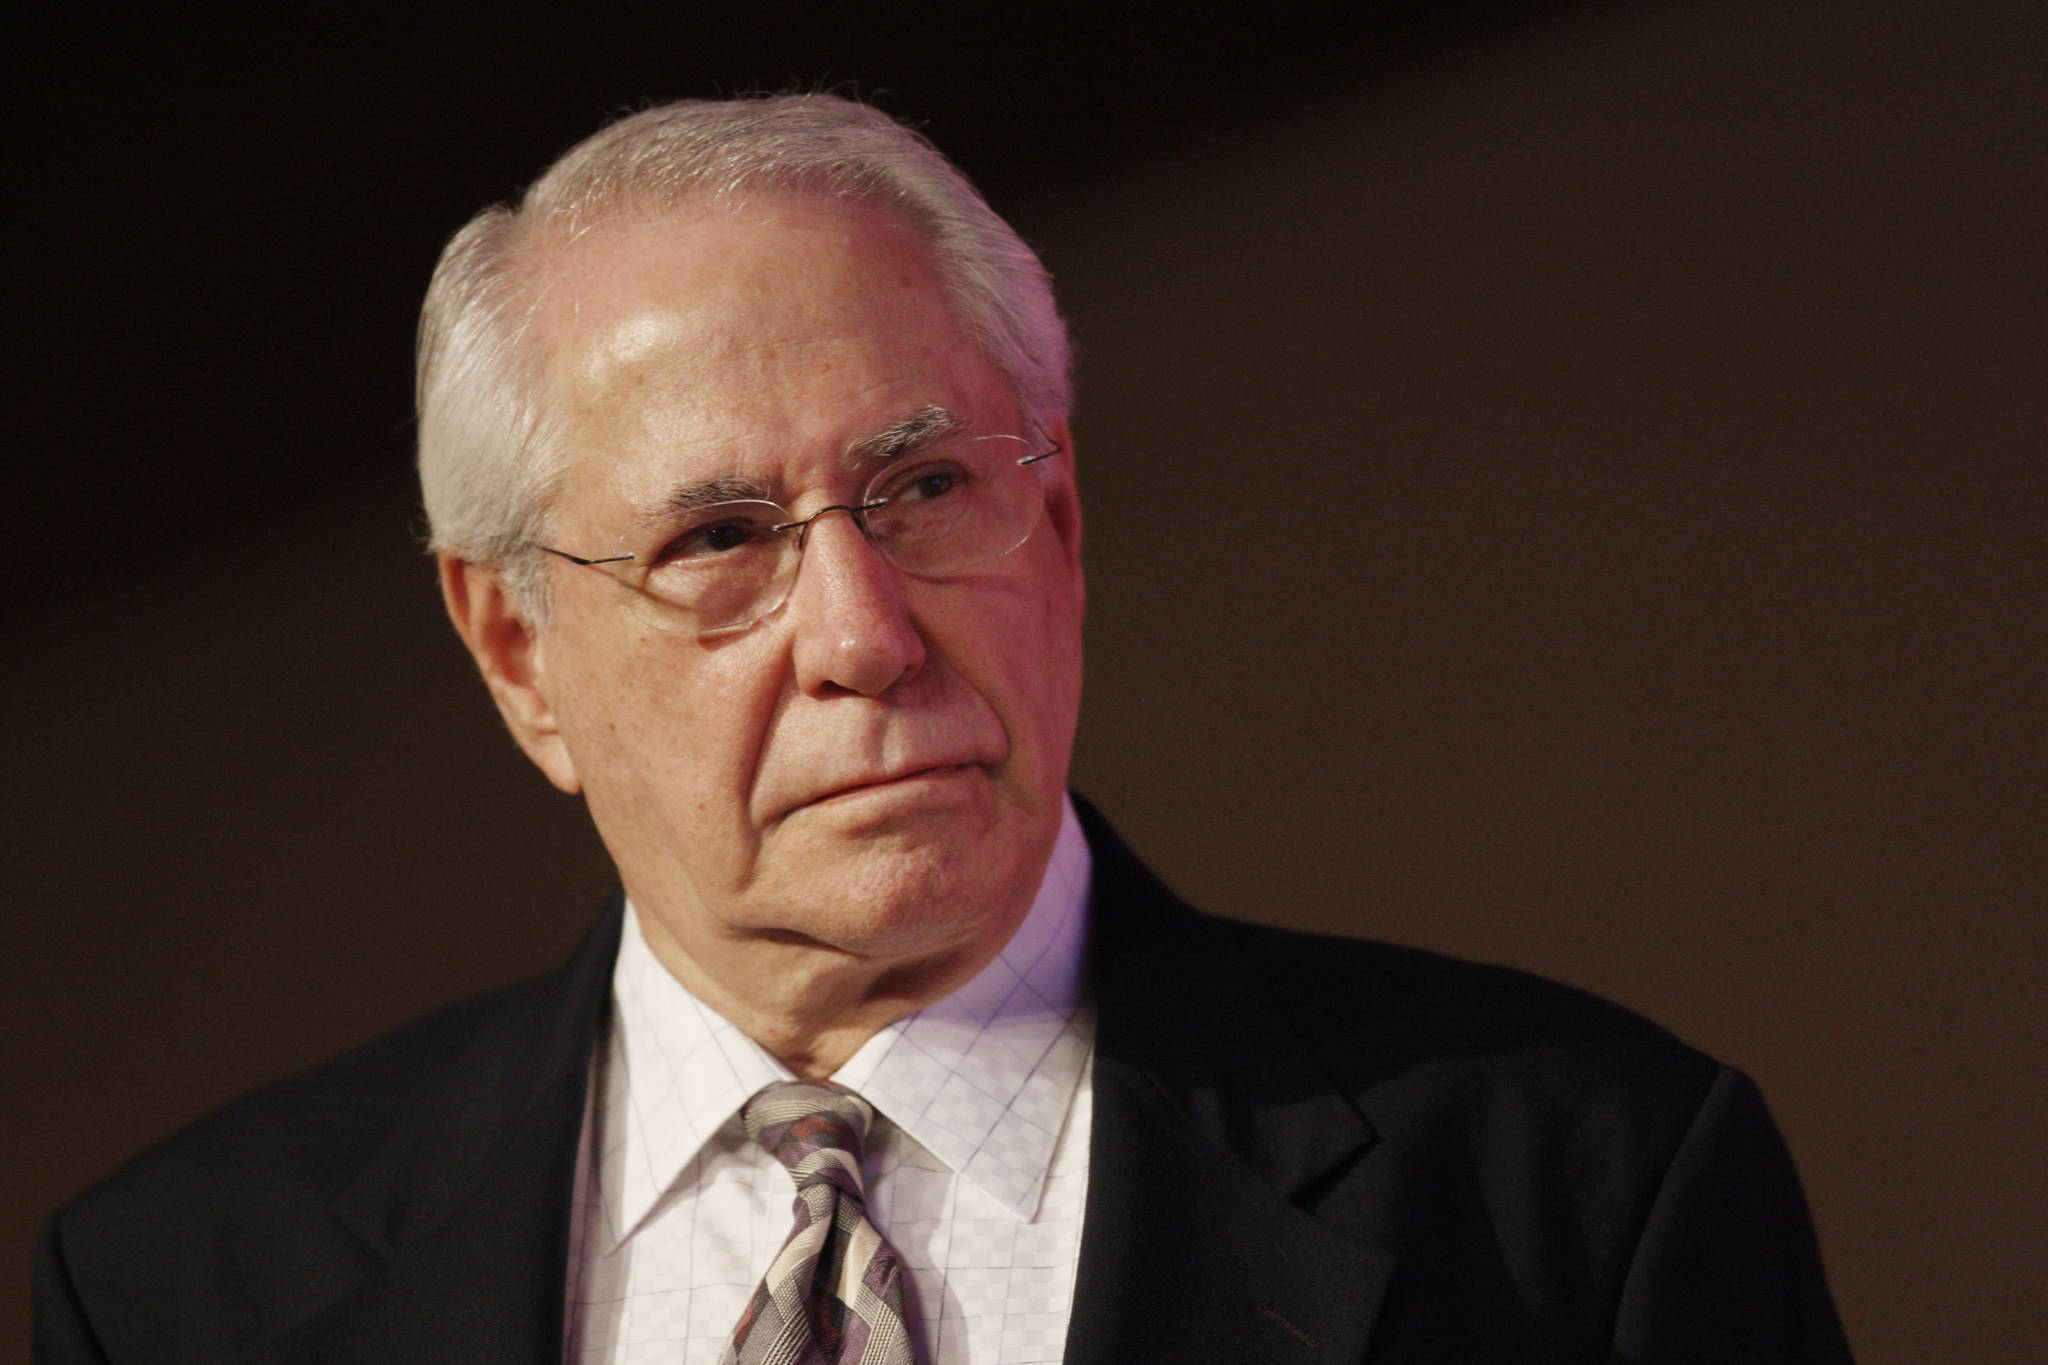 AP Photo / Charles Dharapak
Then-Democratic presidential hopeful and former Alaska Sen. Mike Gravel speaks at the “Take Back America” political conference in Washington, in this June 2007 photo.